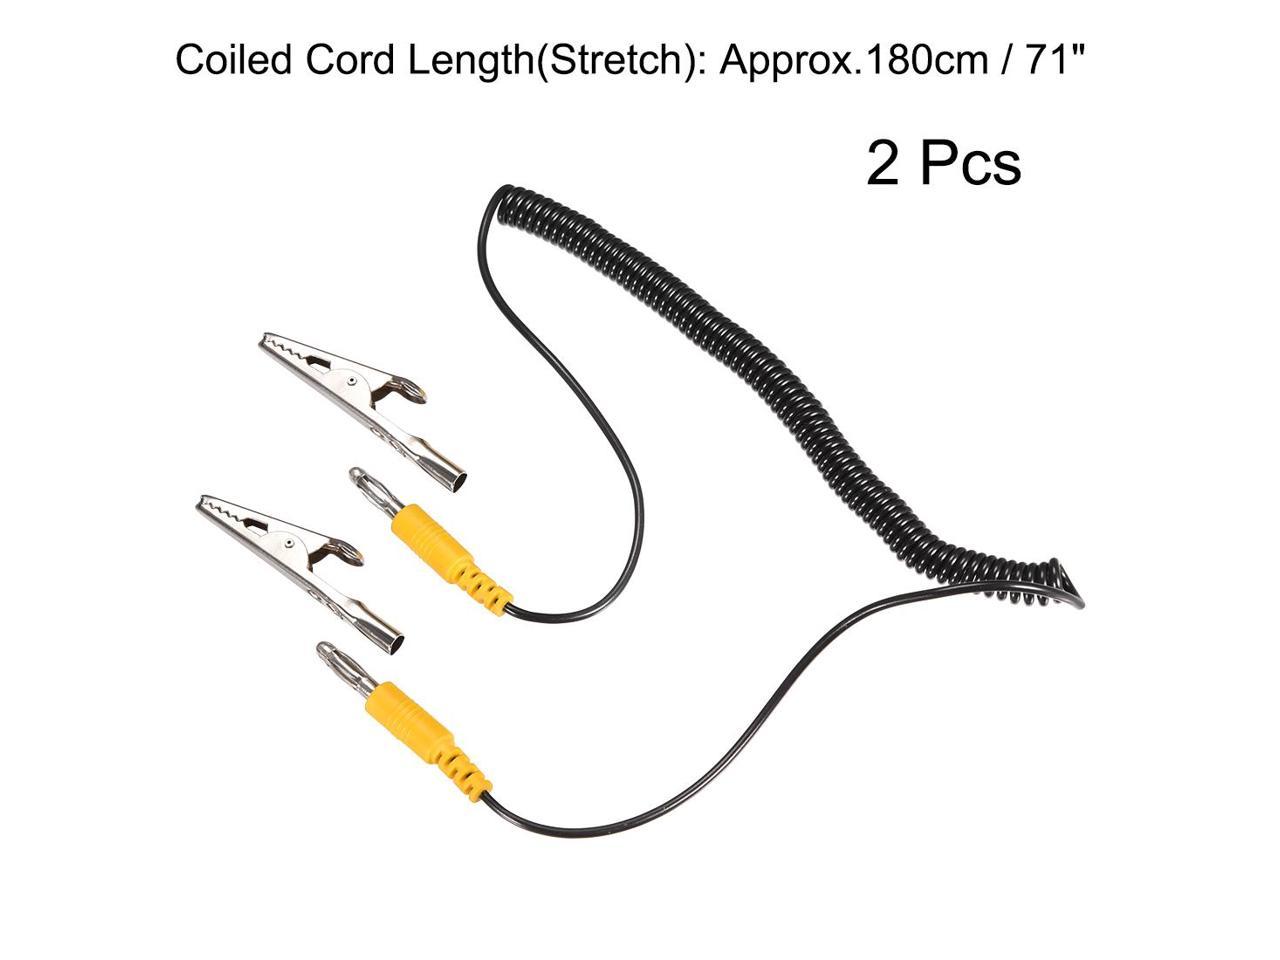 Anti-Static ESD Grounding Cable Coiled Cord, with Double Alligator Clip Claw 2pcs